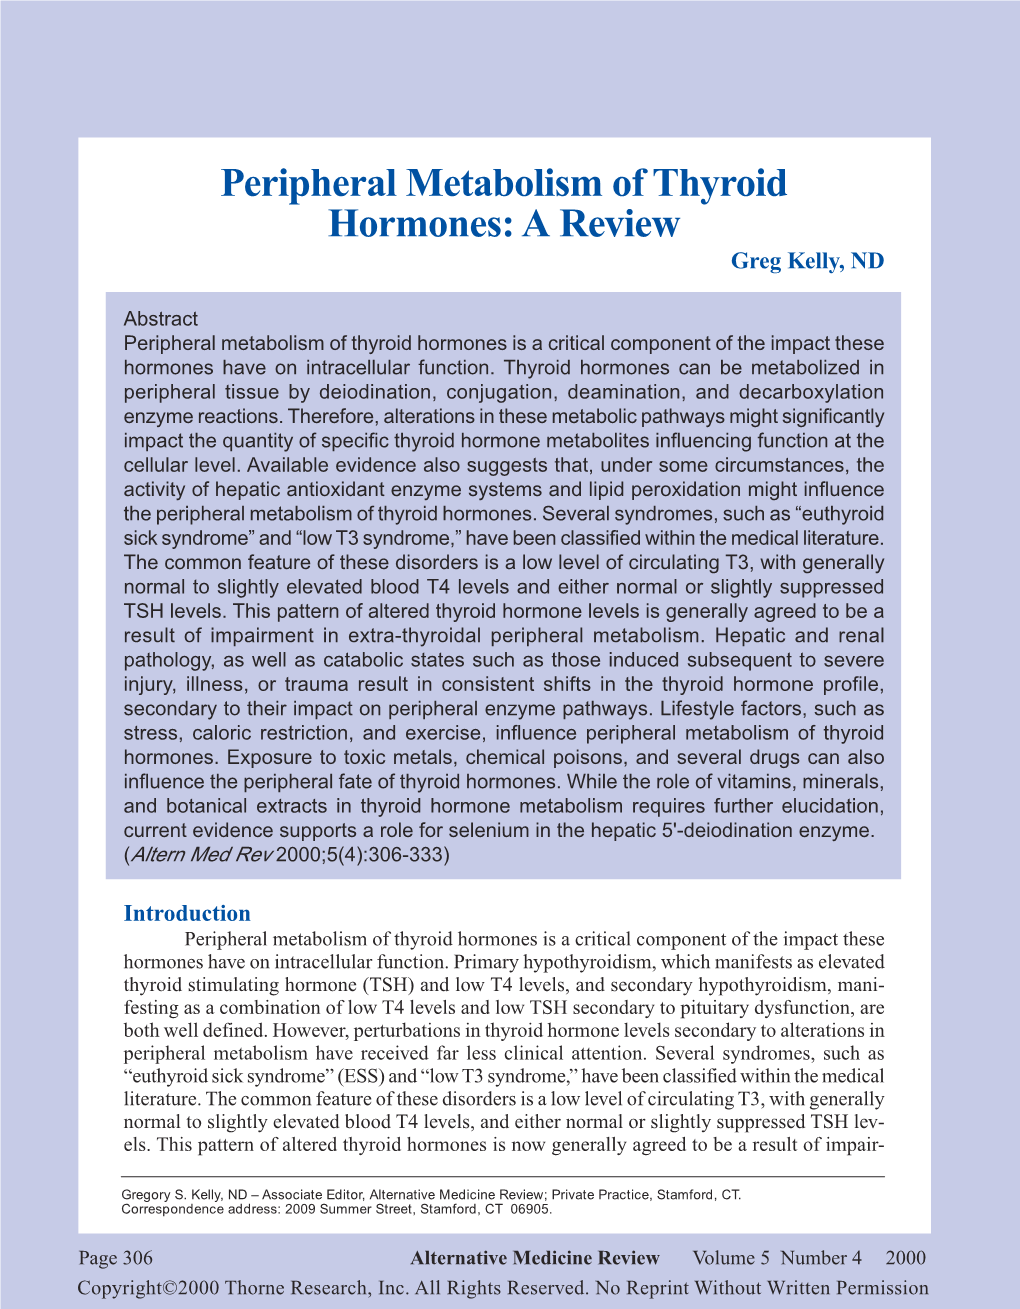 Peripheral Metabolism of Thyroid Hormones: a Review Greg Kelly, ND